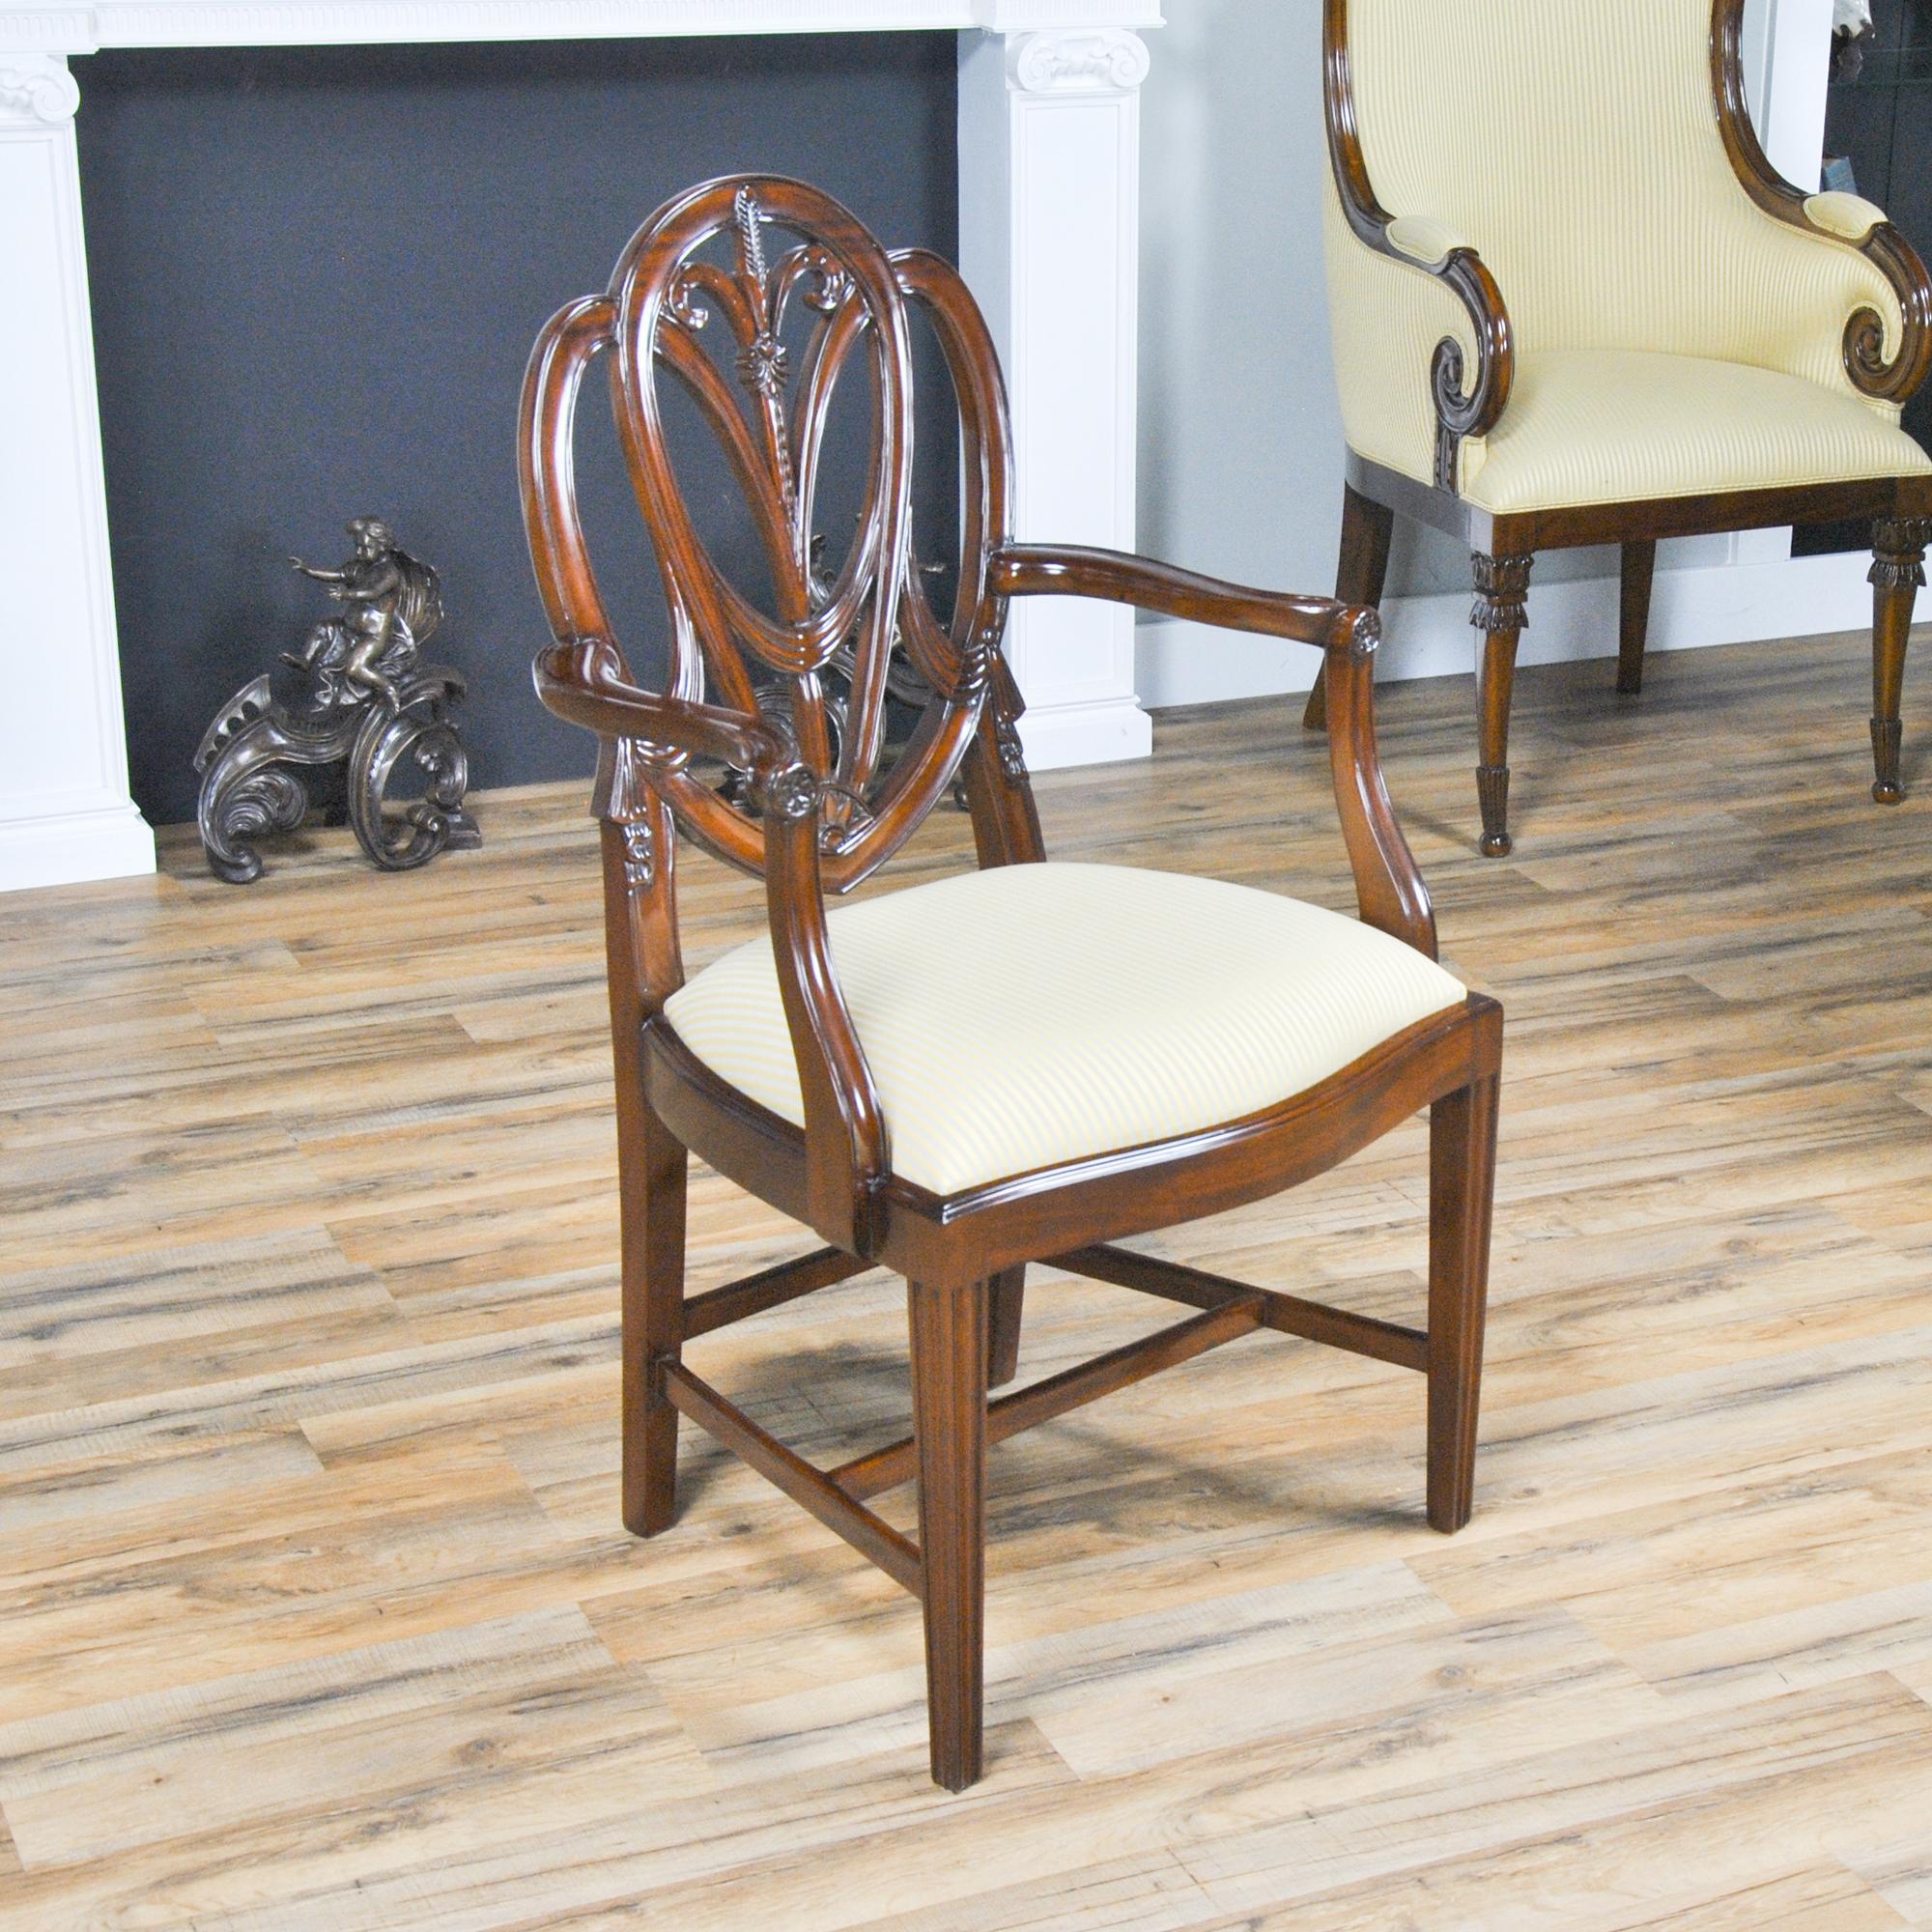 This fine quality set of 10 Tall Sweet Heart Chairs consists of 2 arm chairs and eight side chairs. Each chair has an elegant and stylish back carved from solid mahogany and featuring Drape Carvings as well as interconnected loops crested by a Fleur